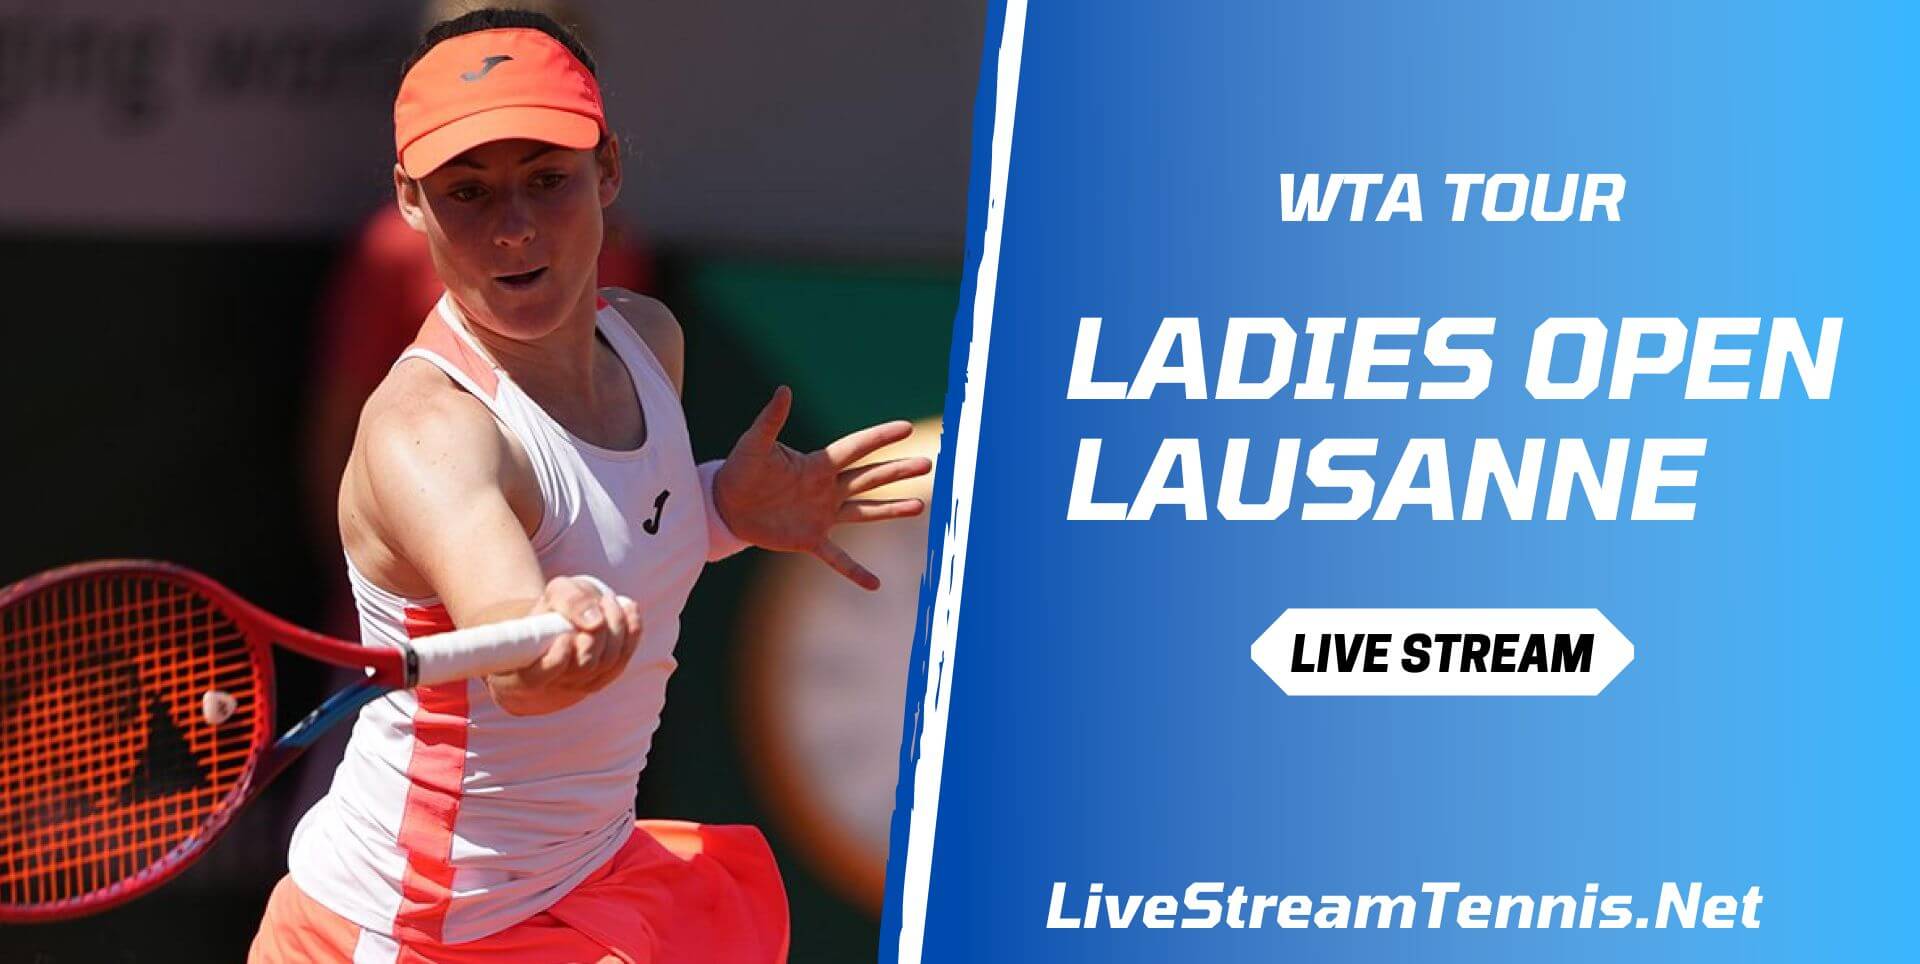 ladies-open-lausanne-live-streaming-wta-250